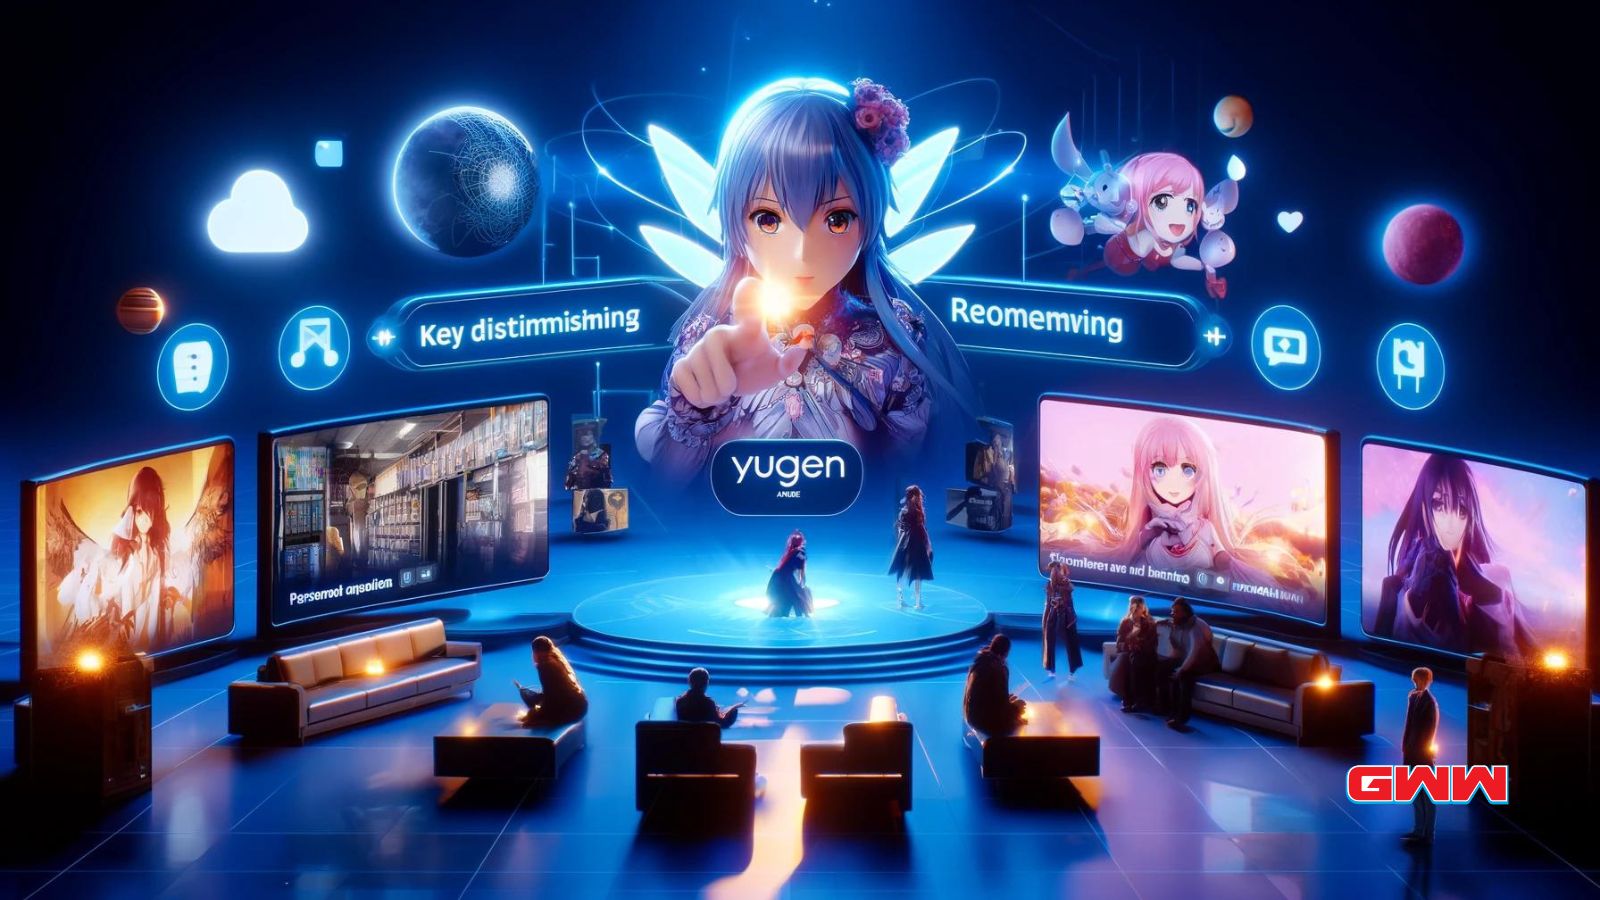 A striking scene highlighting what makes Yugen Anime stand out from other platforms. 